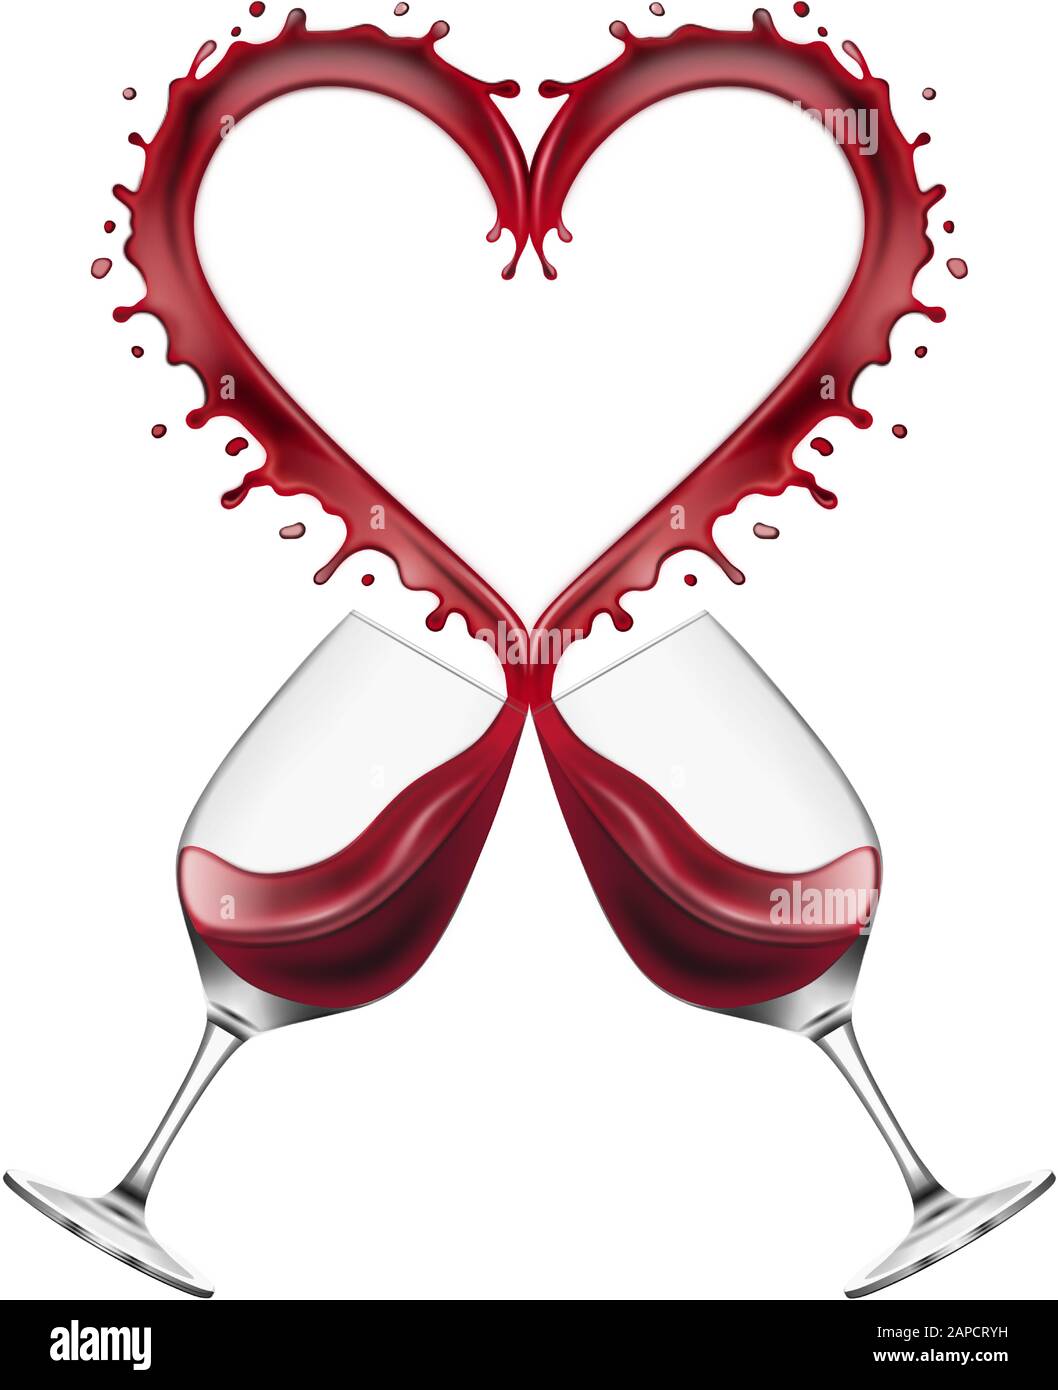 Red Wine Glasses Toast With Heart Shaped Splash Stock Vector Image And Art Alamy